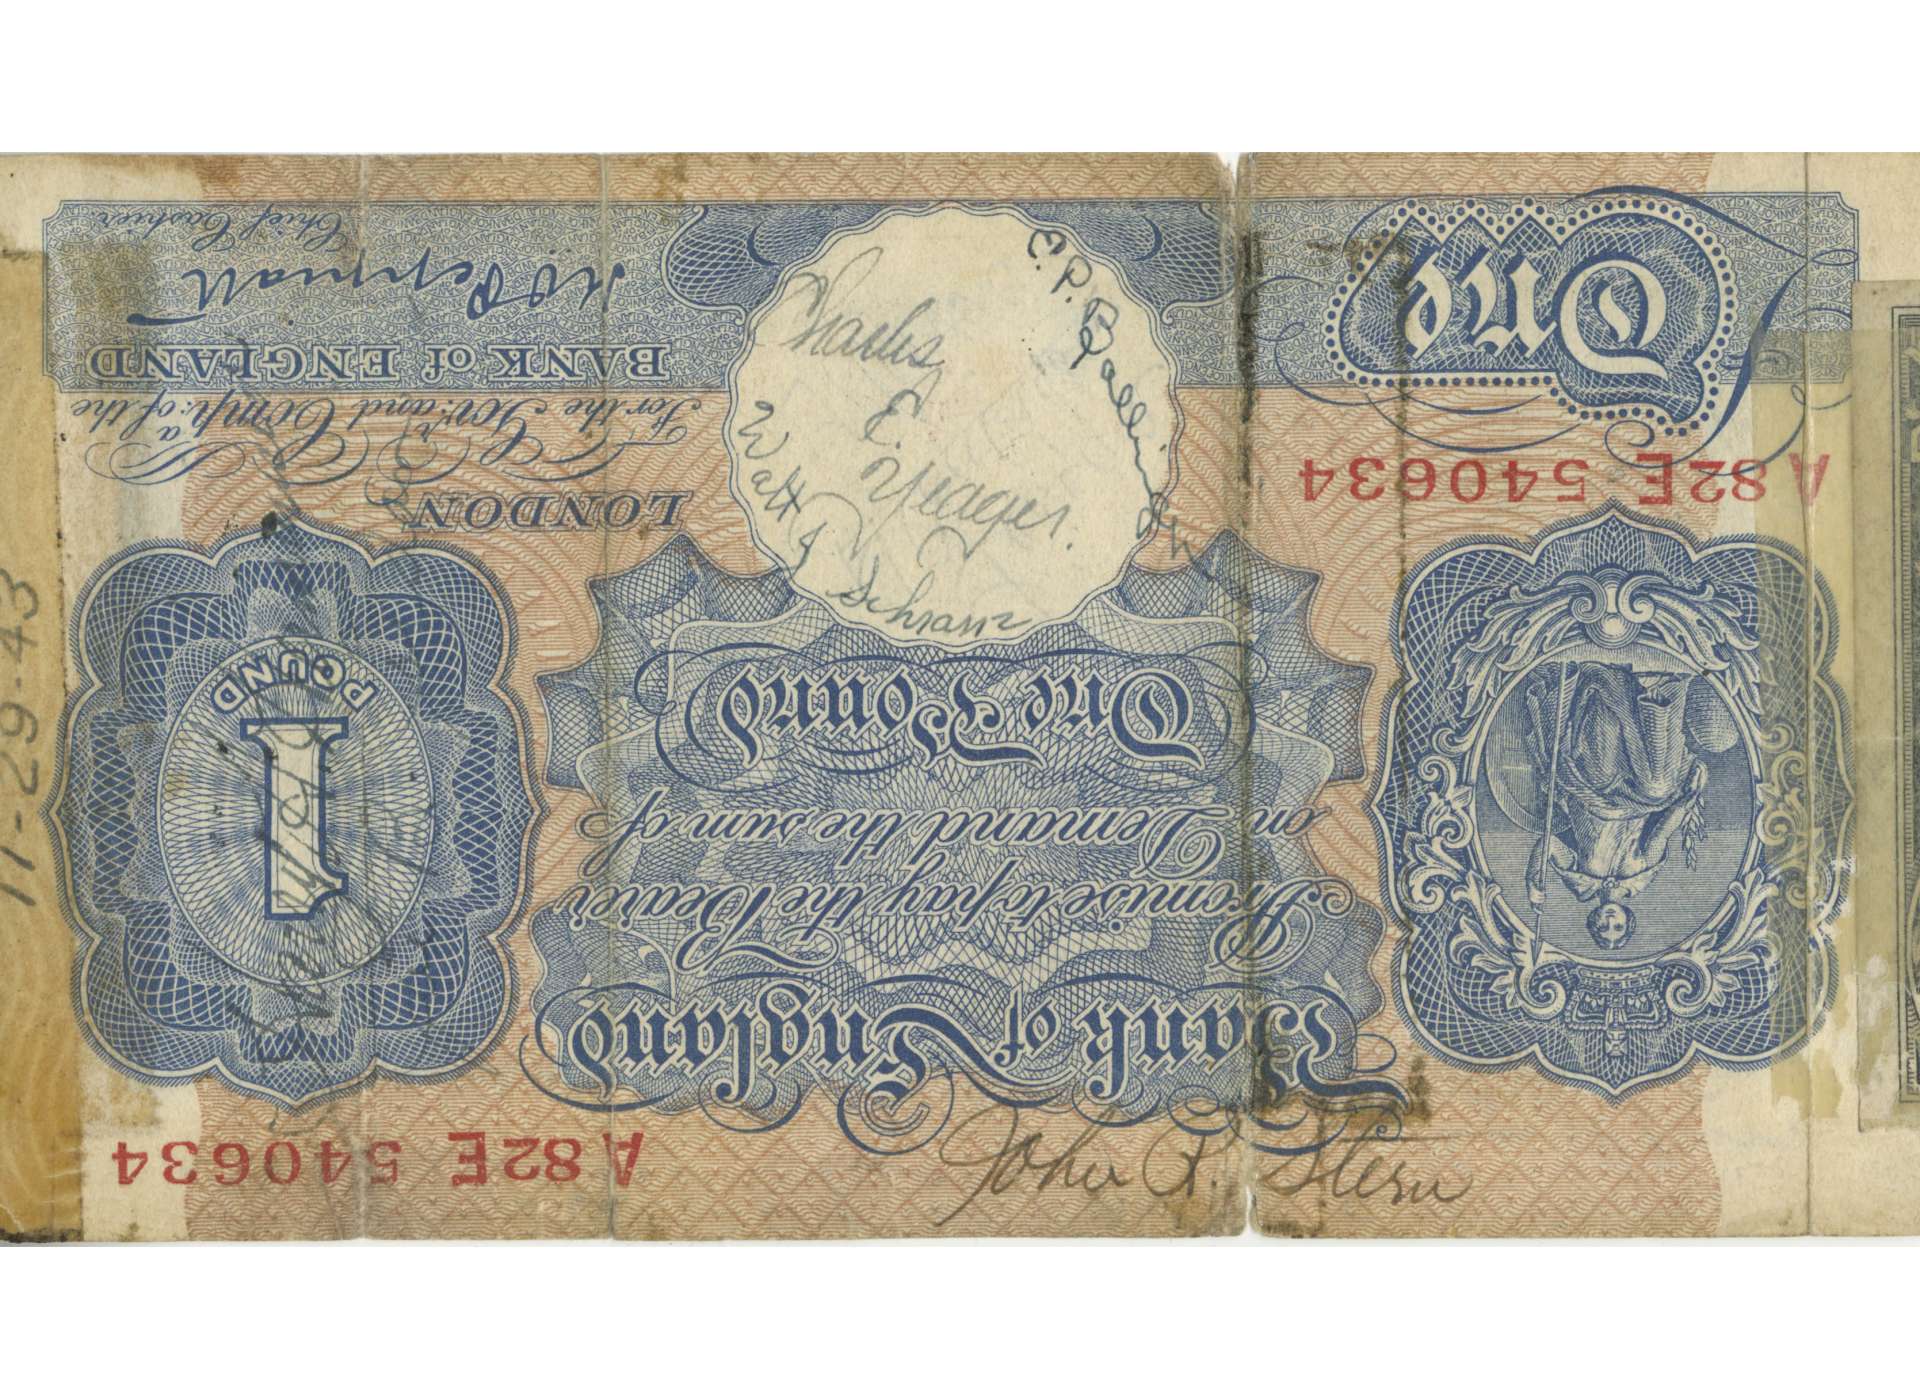 An English pound note with signatures of squadron members that was carried by Captain Charles K. Peters. Lieutenant Charles Yeager&#039;s signature is featured prominently in the middle.